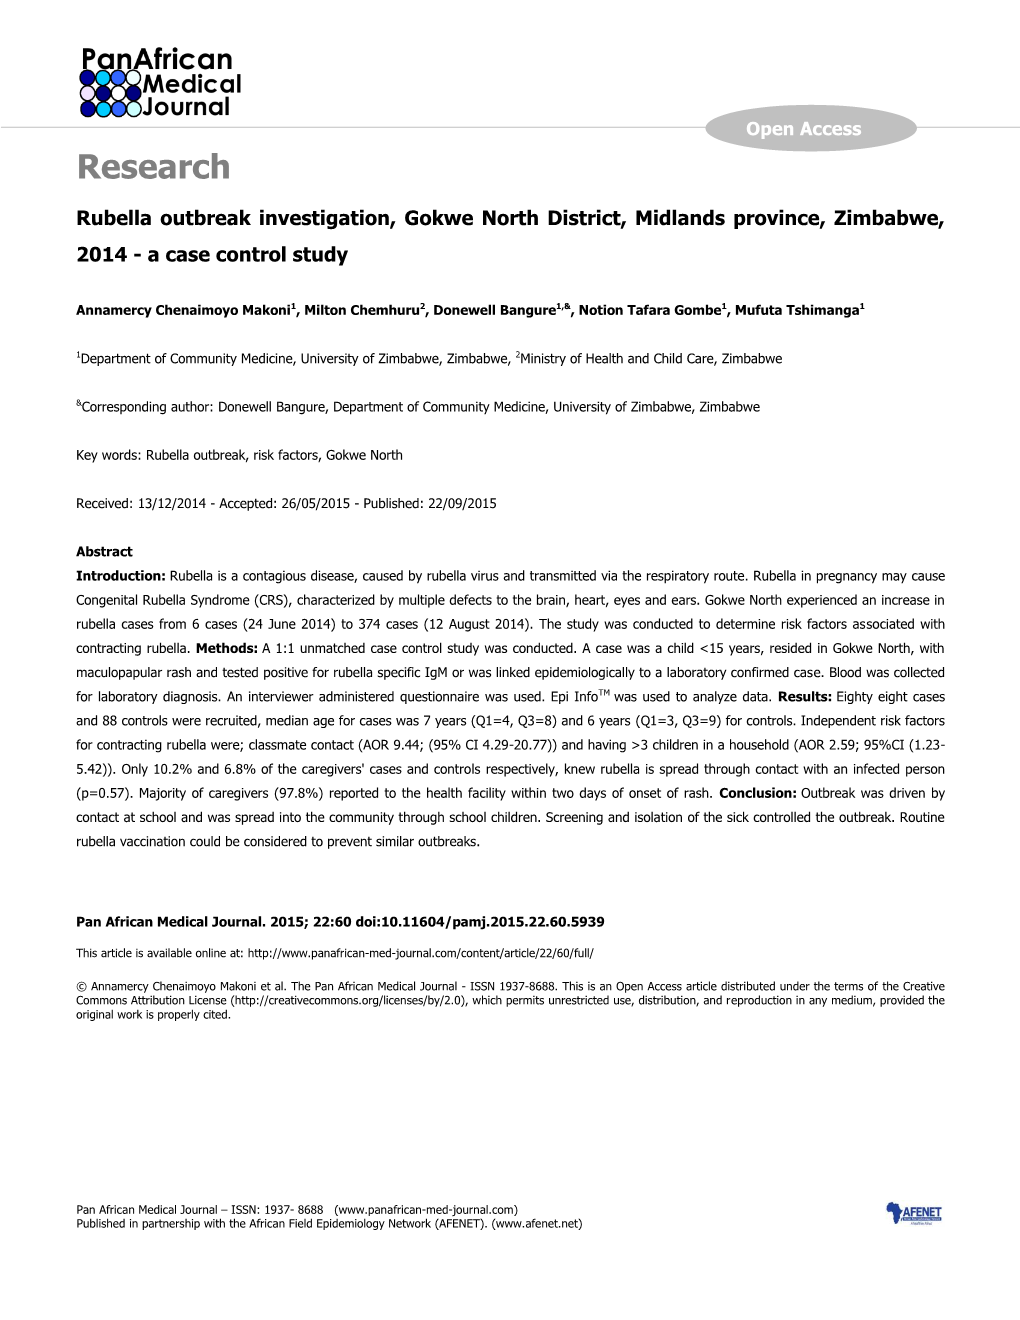 Research Rubella Outbreak Investigation, Gokwe North District, Midlands Province, Zimbabwe, 2014 - a Case Control Study